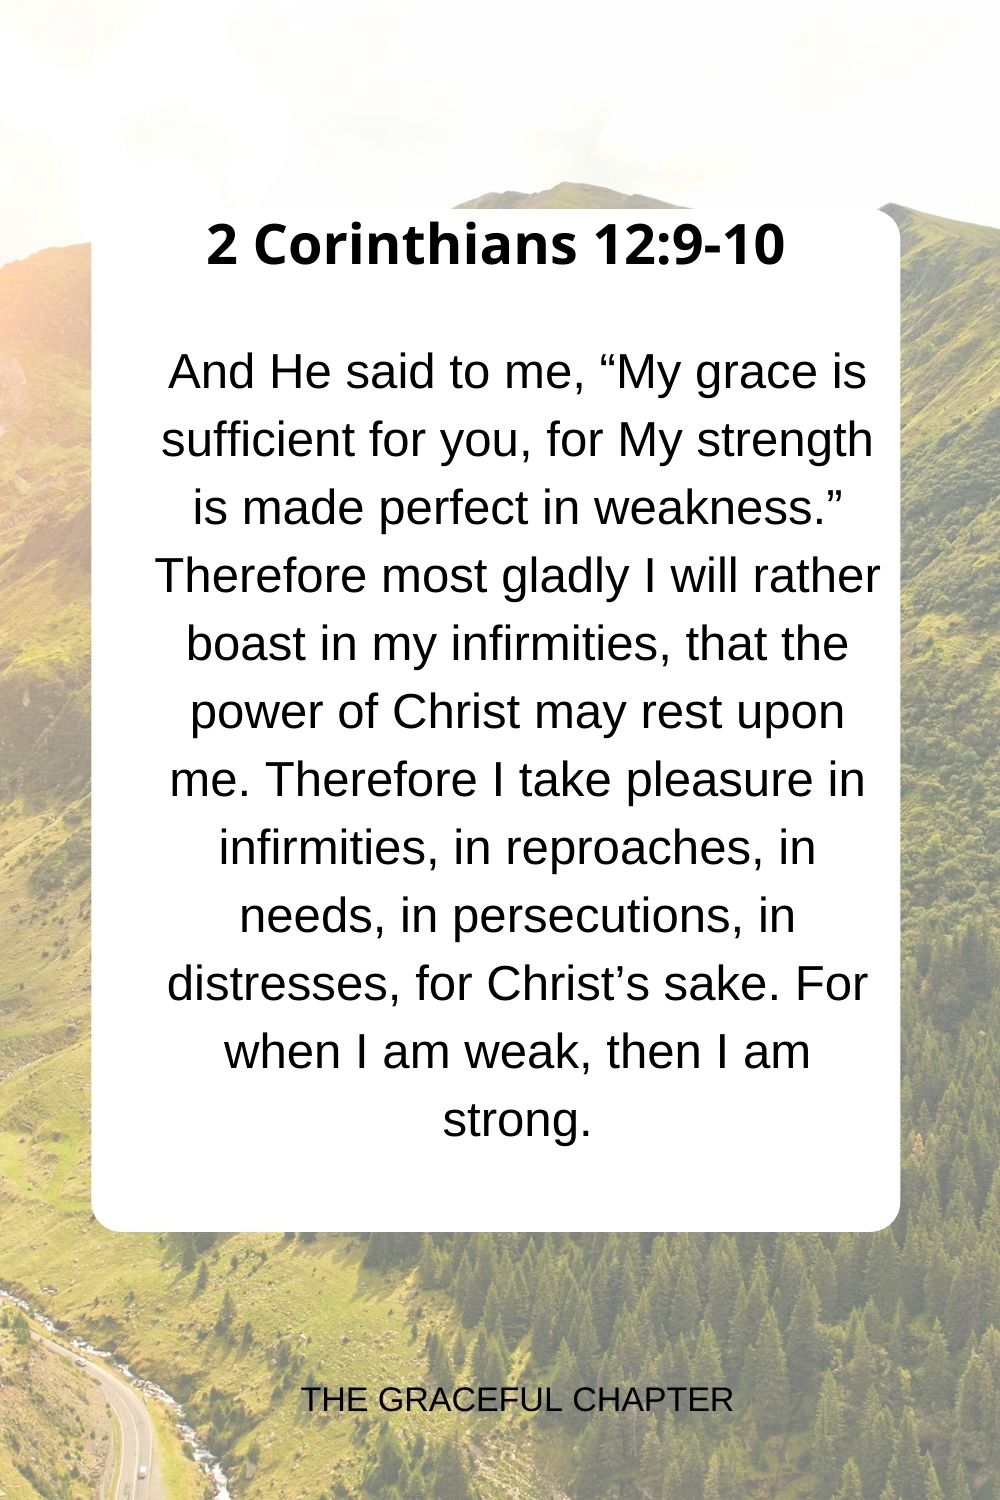 And He said to me, “My grace is sufficient for you, for My strength is made perfect in weakness.” Therefore most gladly I will rather boast in my infirmities, that the power of Christ may rest upon me. Therefore I take pleasure in infirmities, in reproaches, in needs, in persecutions, in distresses, for Christ’s sake. For when I am weak, then I am strong. 2 Corinthians 12:9-10